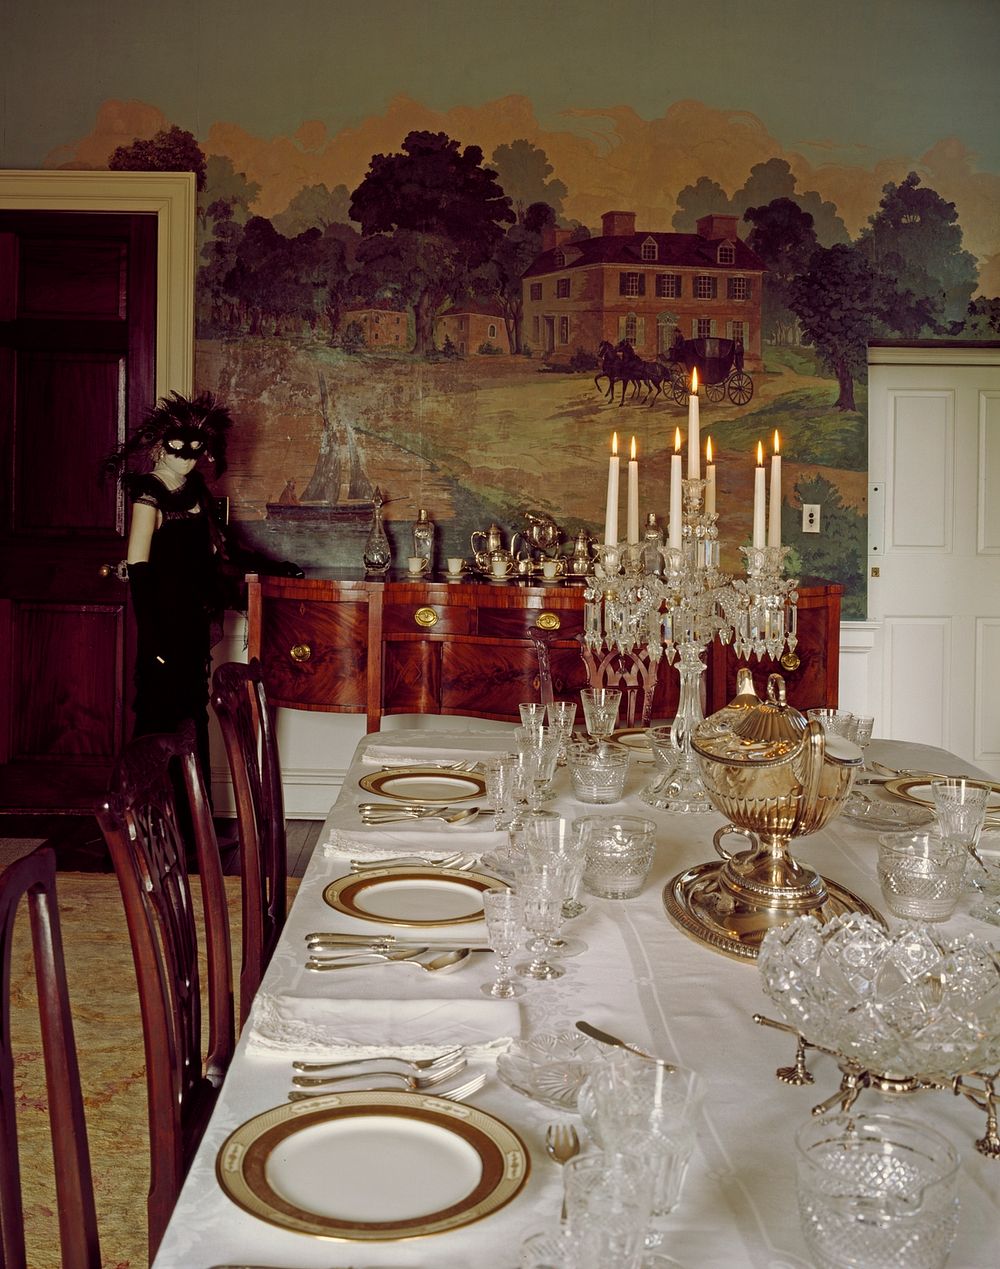 Inside the George Read II house in New Castle, Delaware (1980-2006) by Carol M. Highsmith. Original image from Library of…